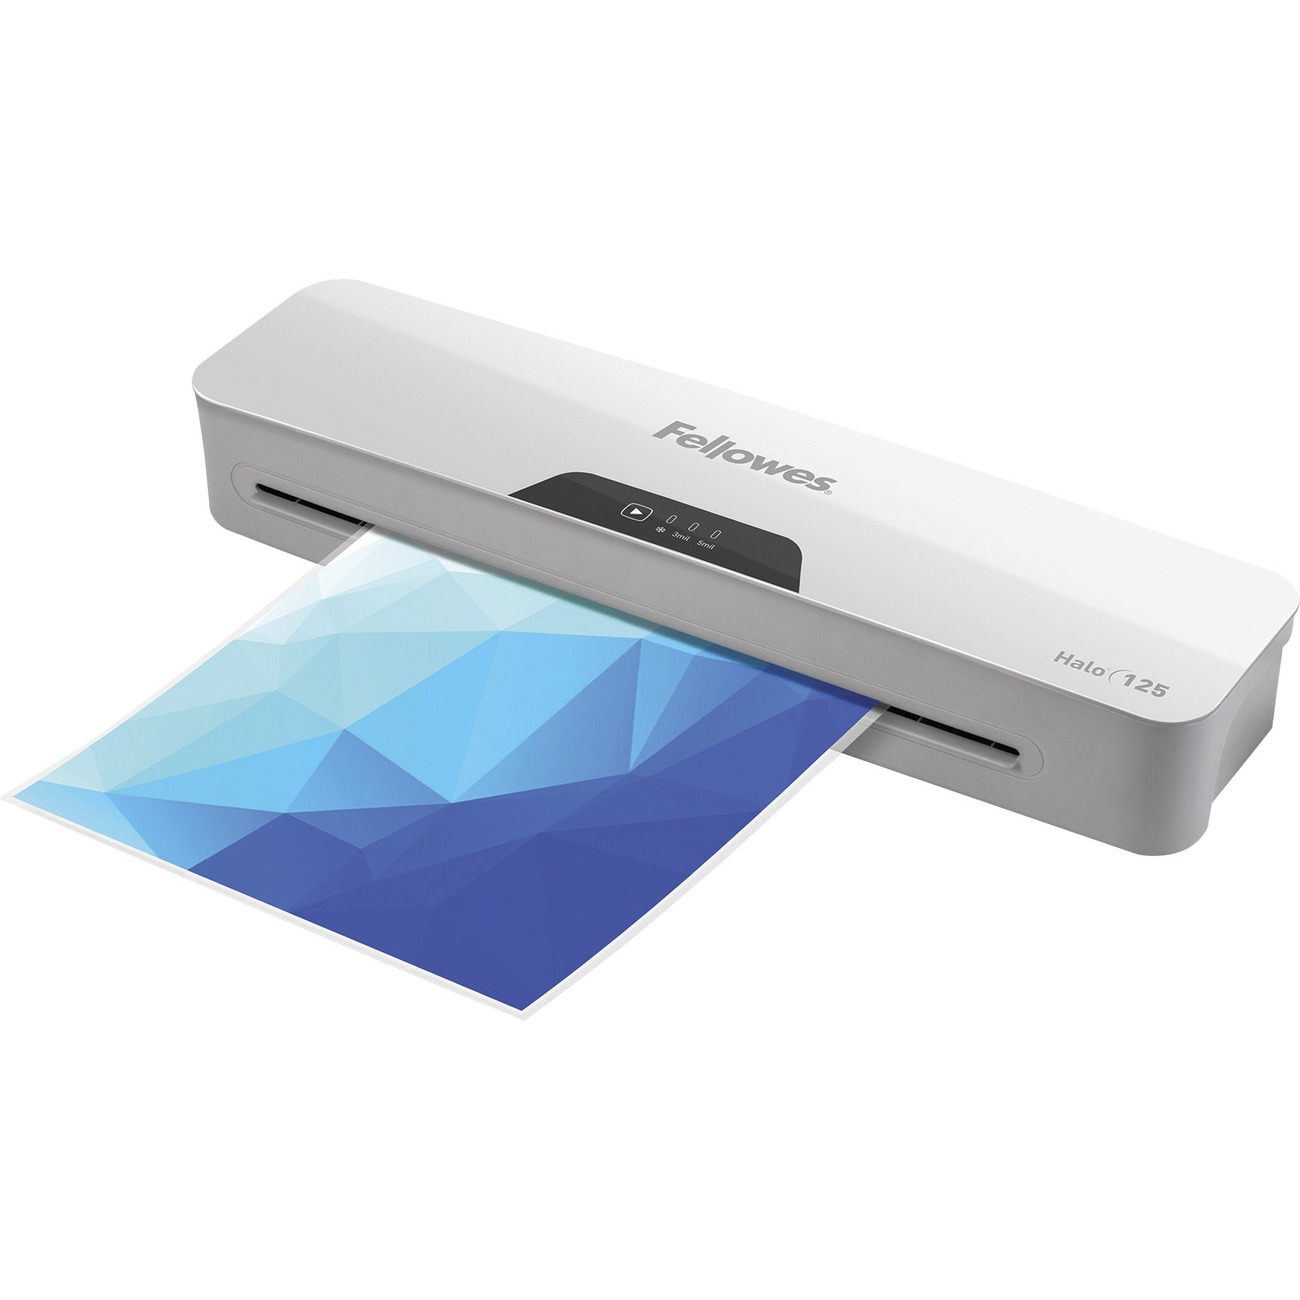 Tussen uitbreiden Apt Fellowes Halo™ 125 Laminator with Pouch Starter Kit - Pouch - Release Lever  - 4.3" x 17.1" x 2.9" - LATSONS.COM